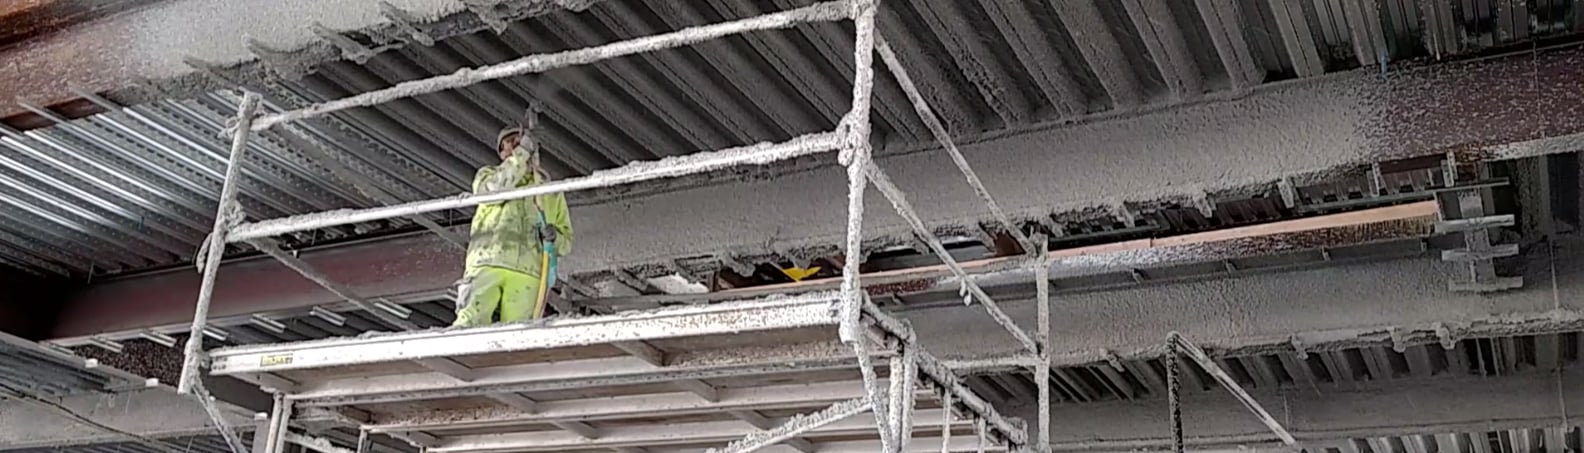 fireproofing-in-action